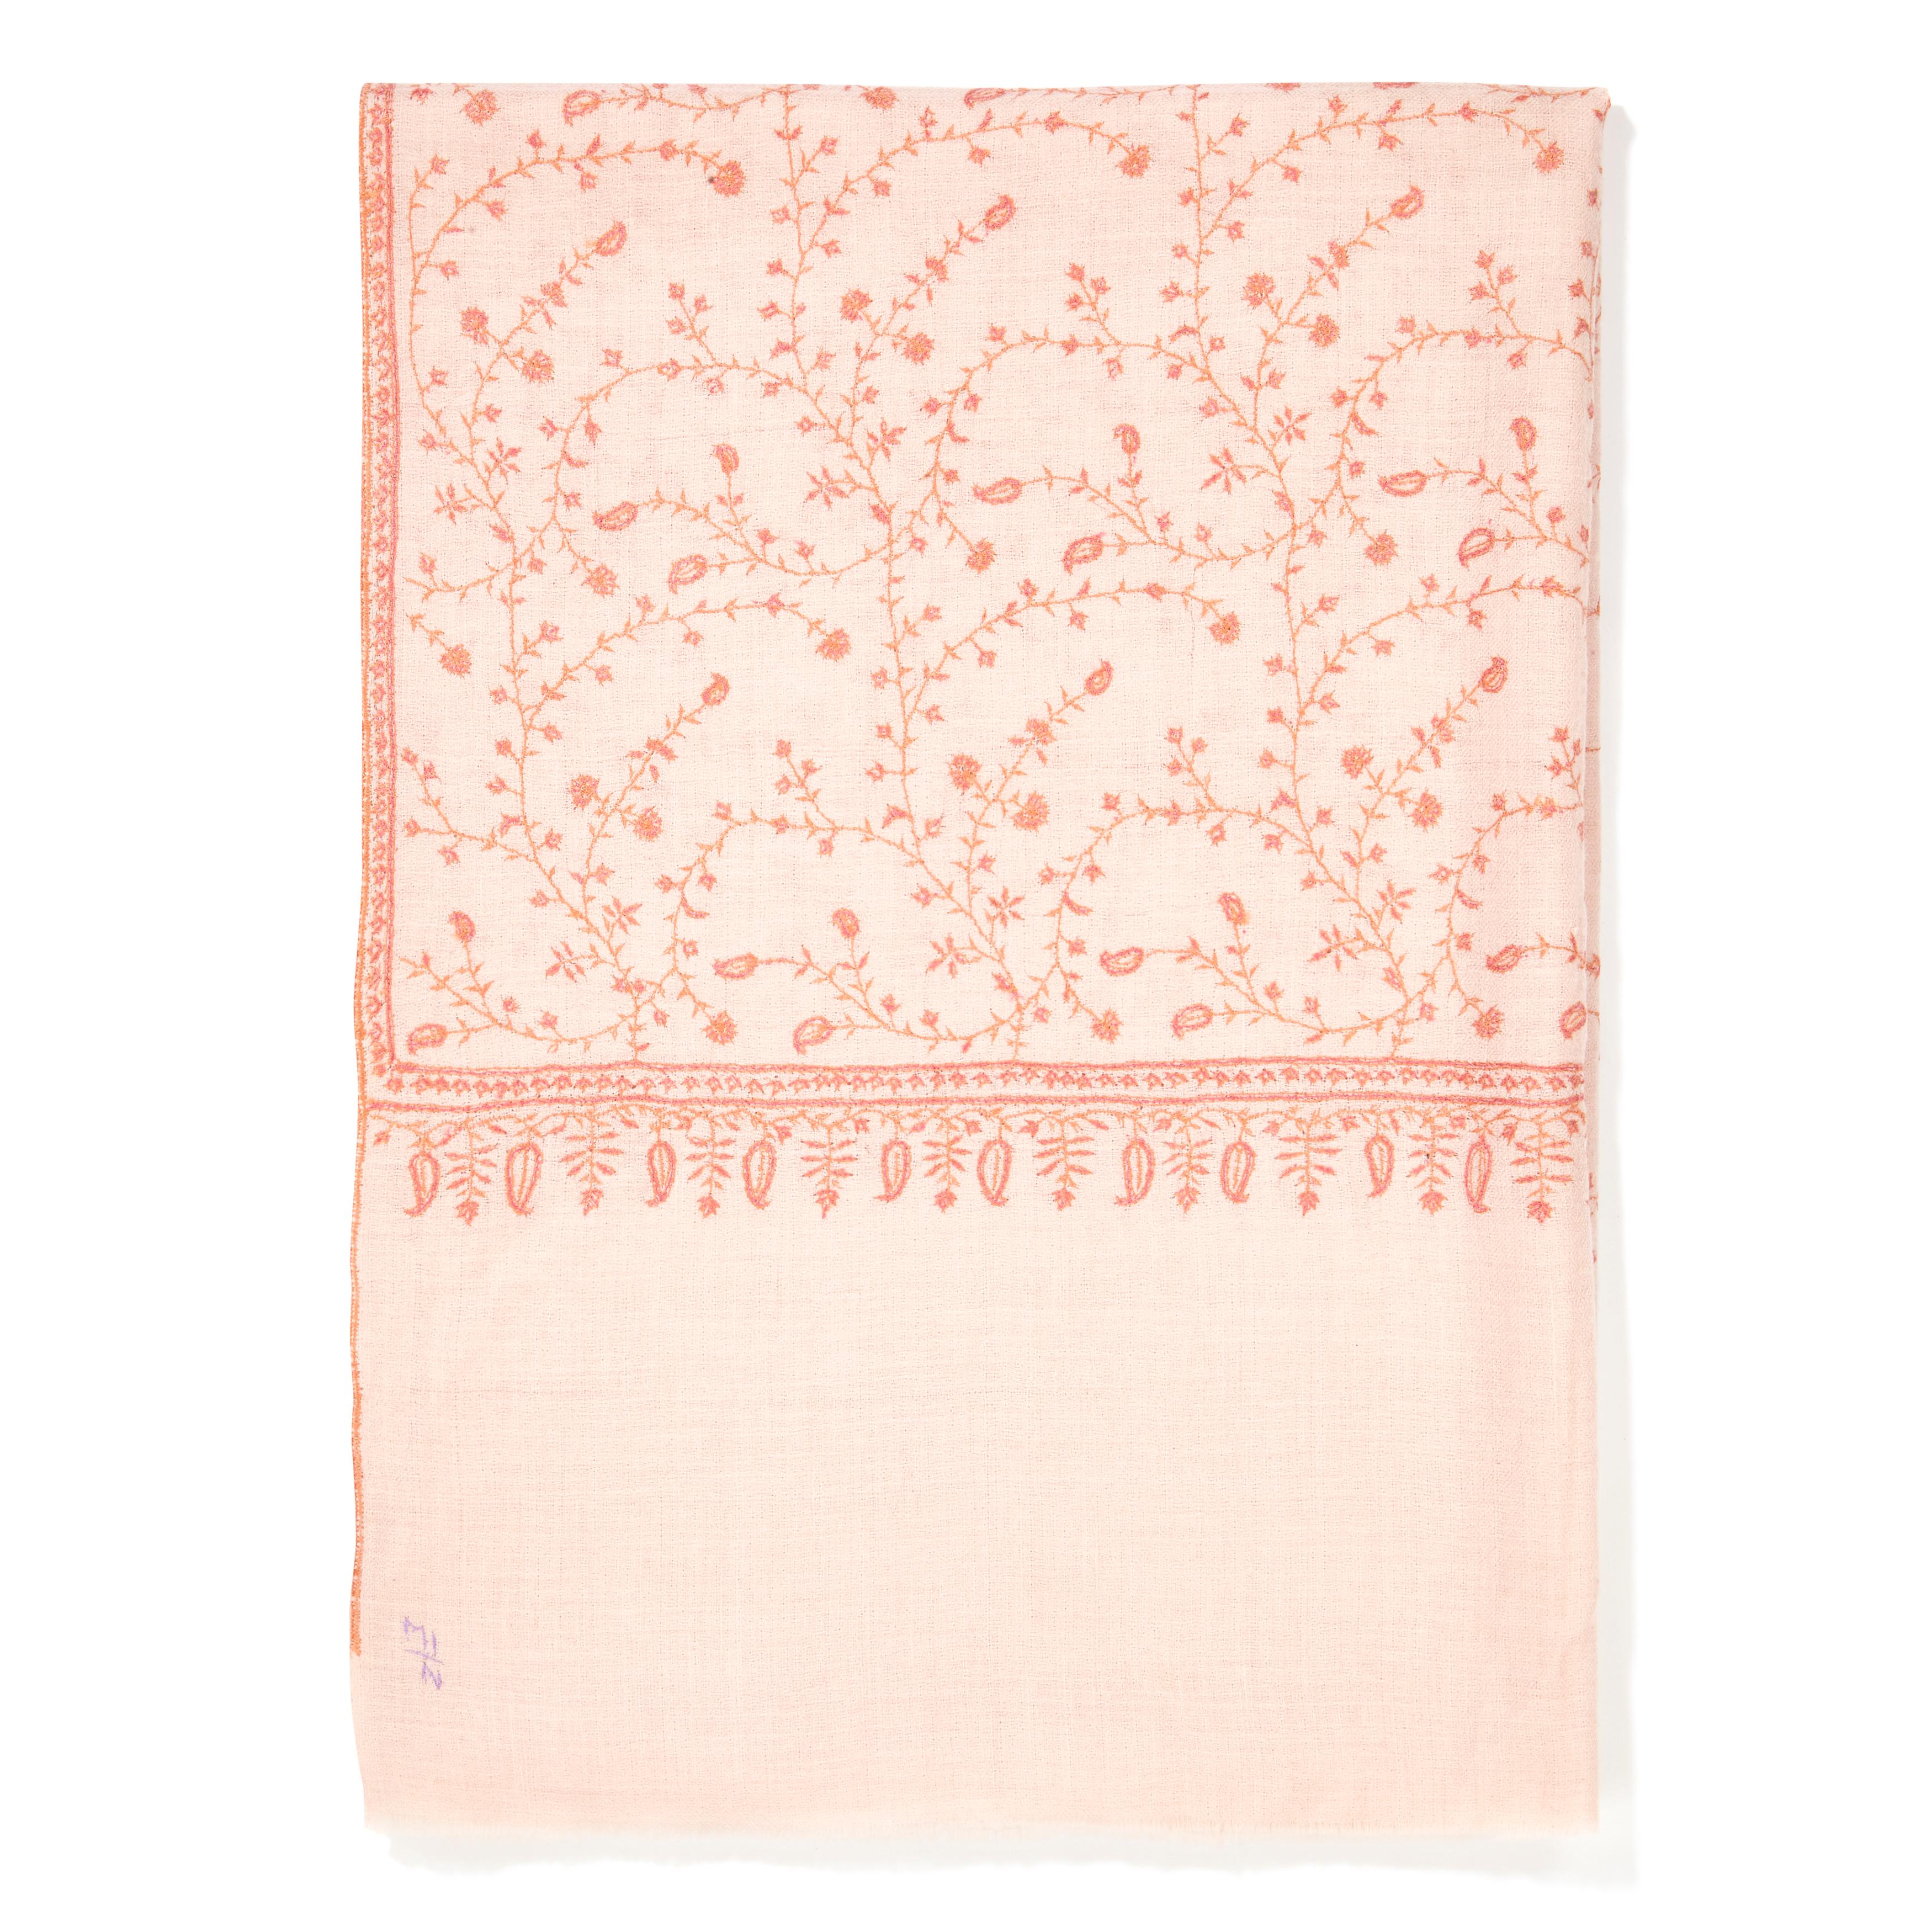 Hand Embroidered Pale Pink 100% Cashmere Shawl made in Kashmir - Brand New 

Verheyen London’s shawl is spun from the finest embroidered woven cashmere from Kashmir.  The embroidery can take up to 1 year to embroider these shawls and each one is